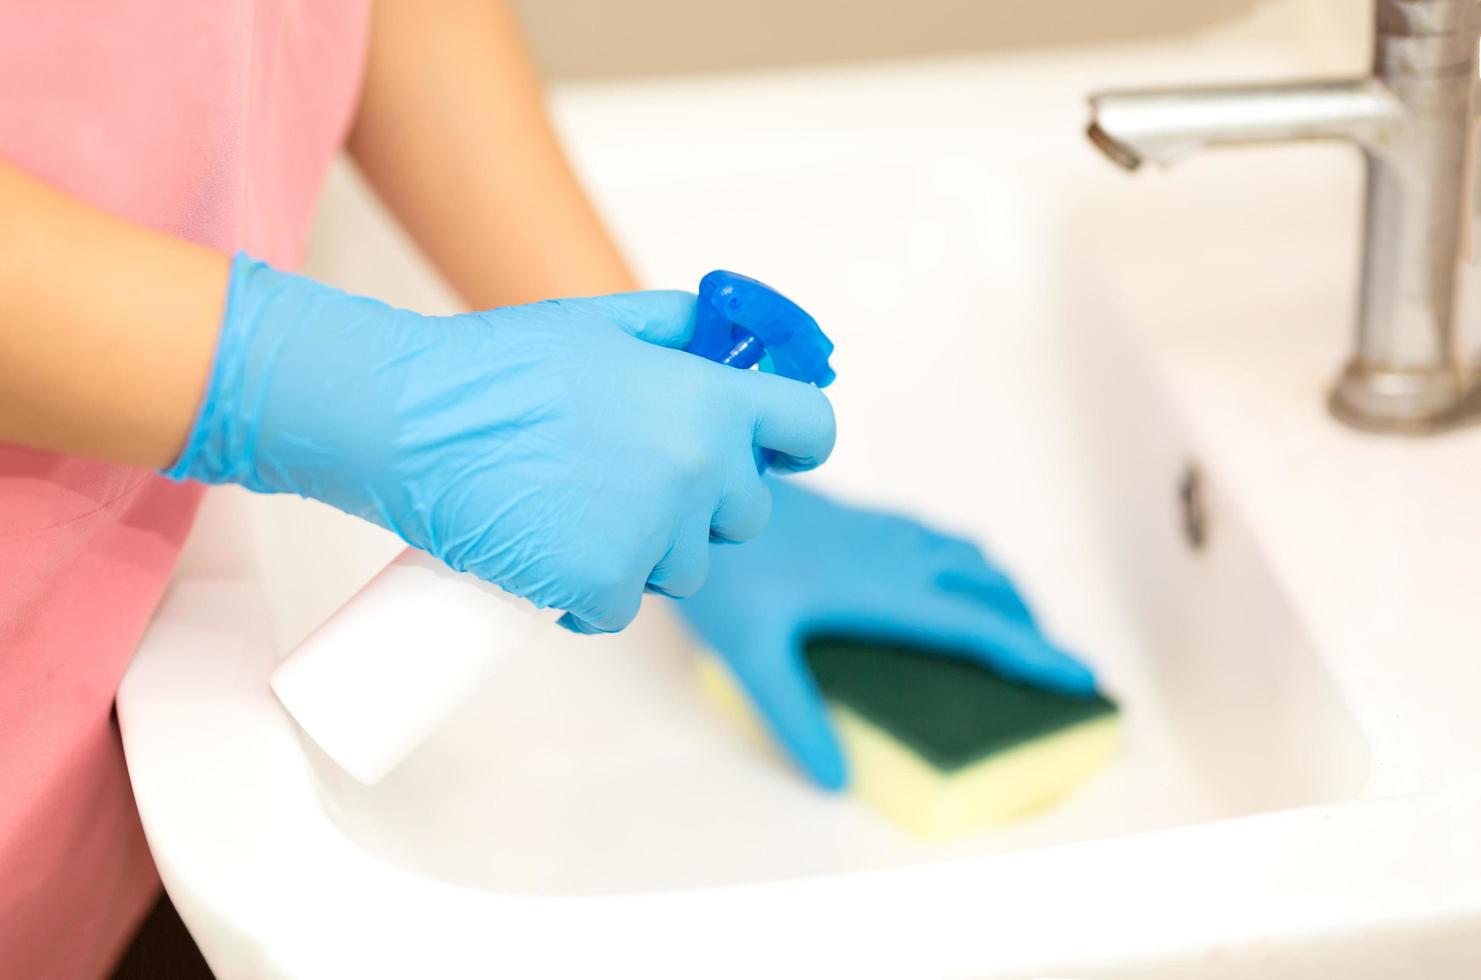 Person, a hand in a blue rubber glove in the picture, removes and washes bathroom sink photo